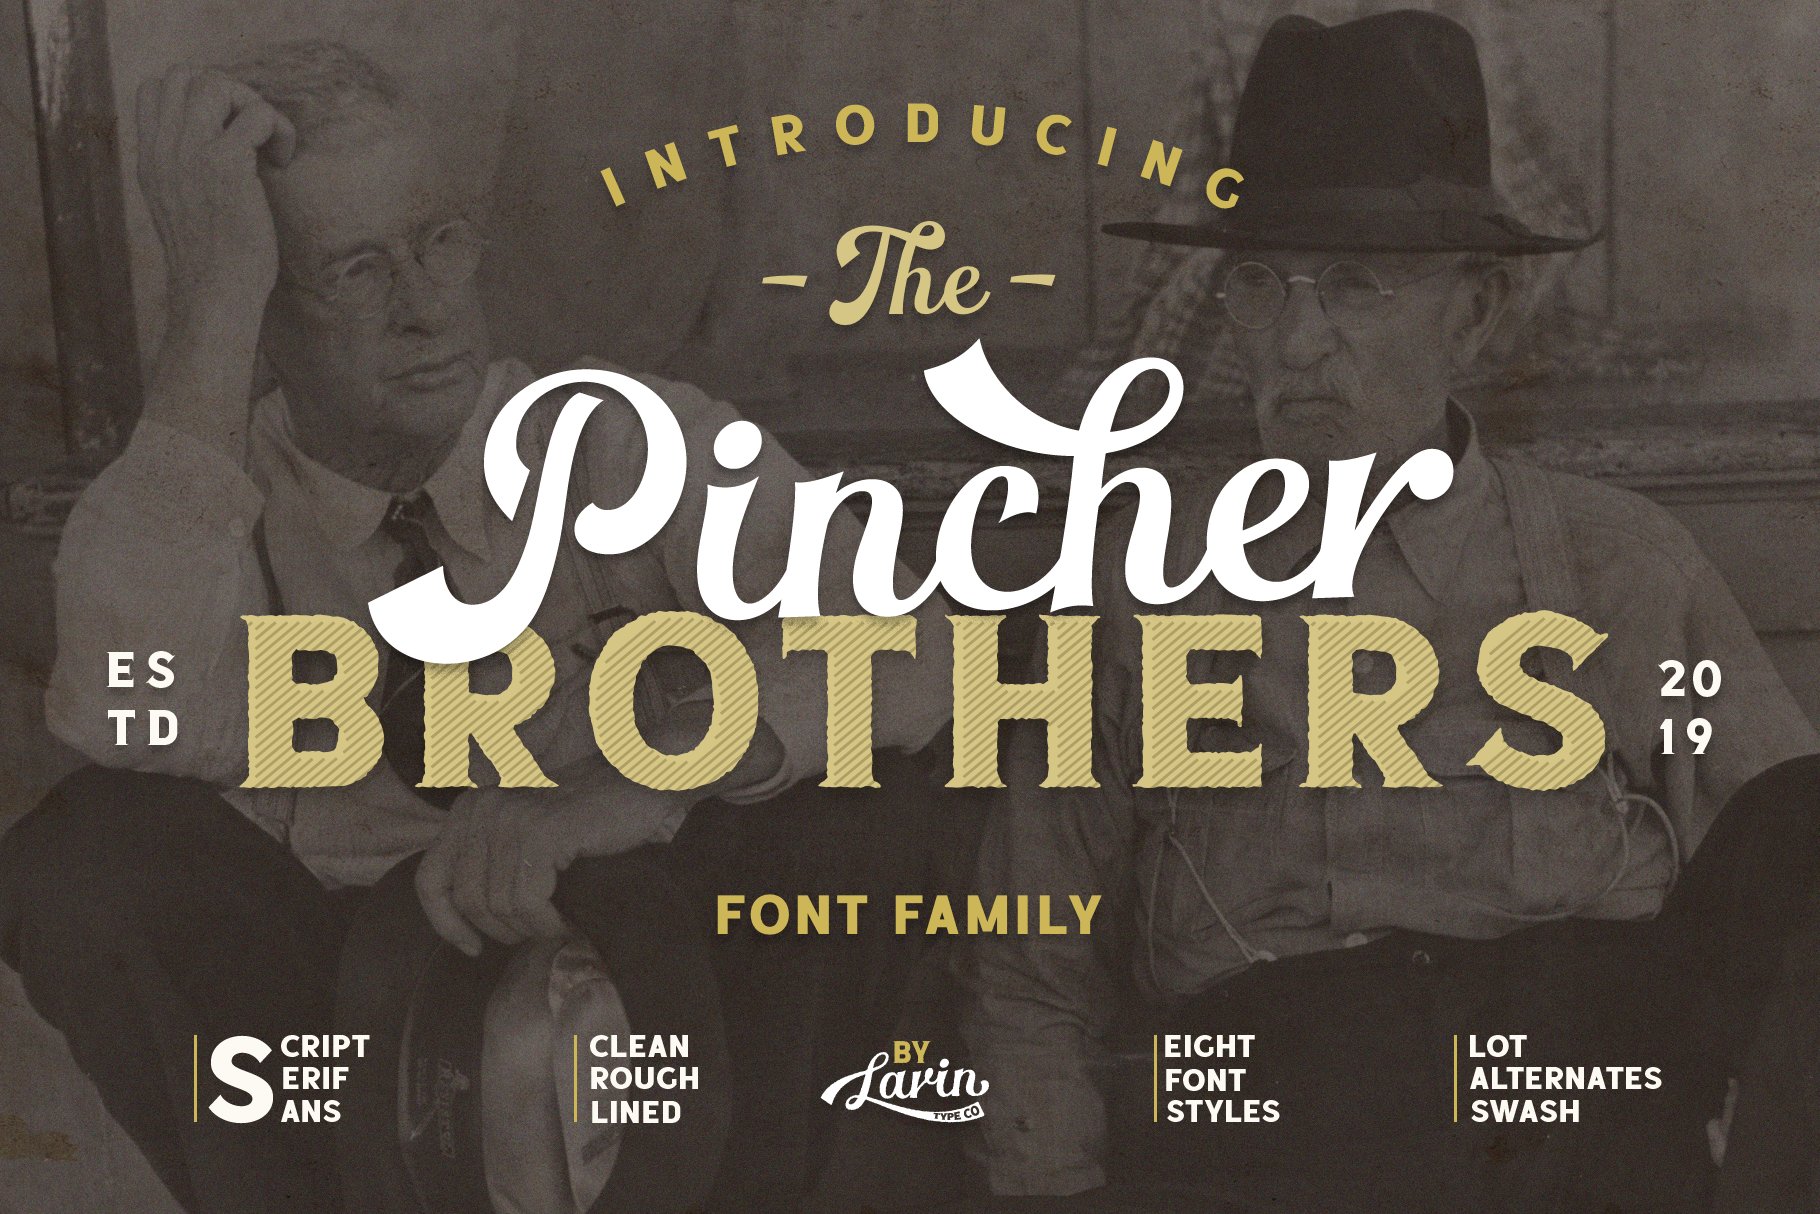 The Pincher Brothers cover image.